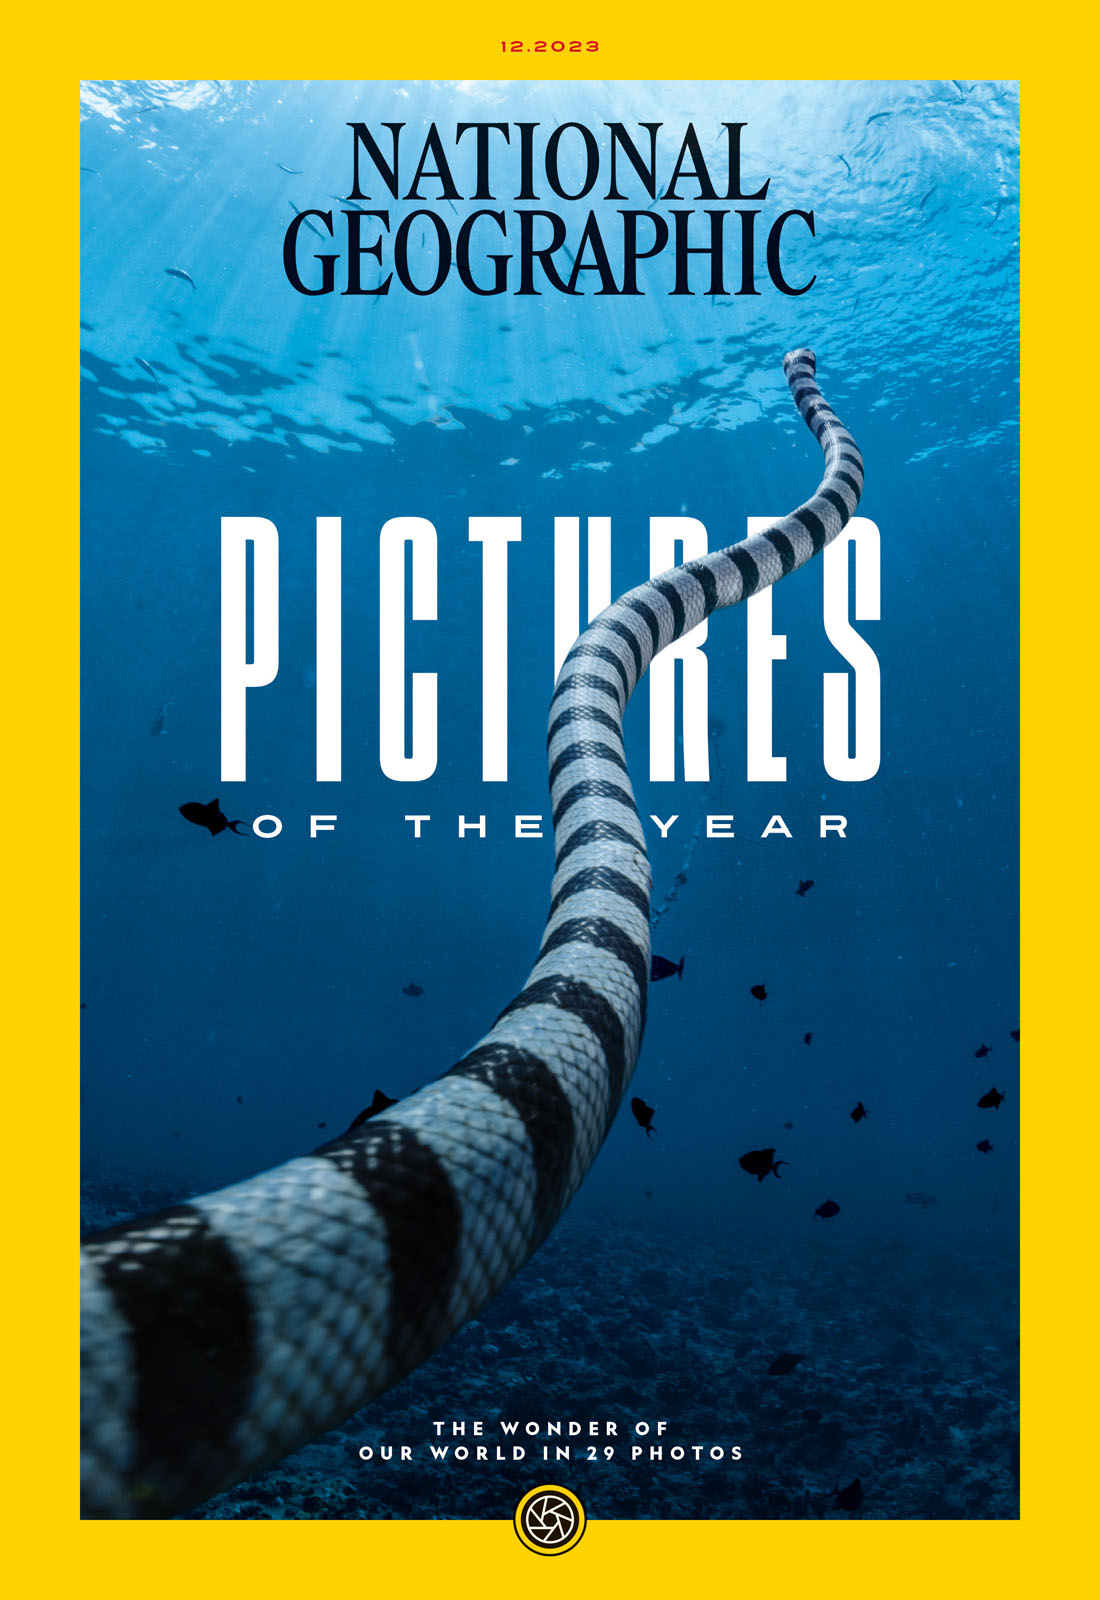 National Geographic 'Pictures of the Year' 2023